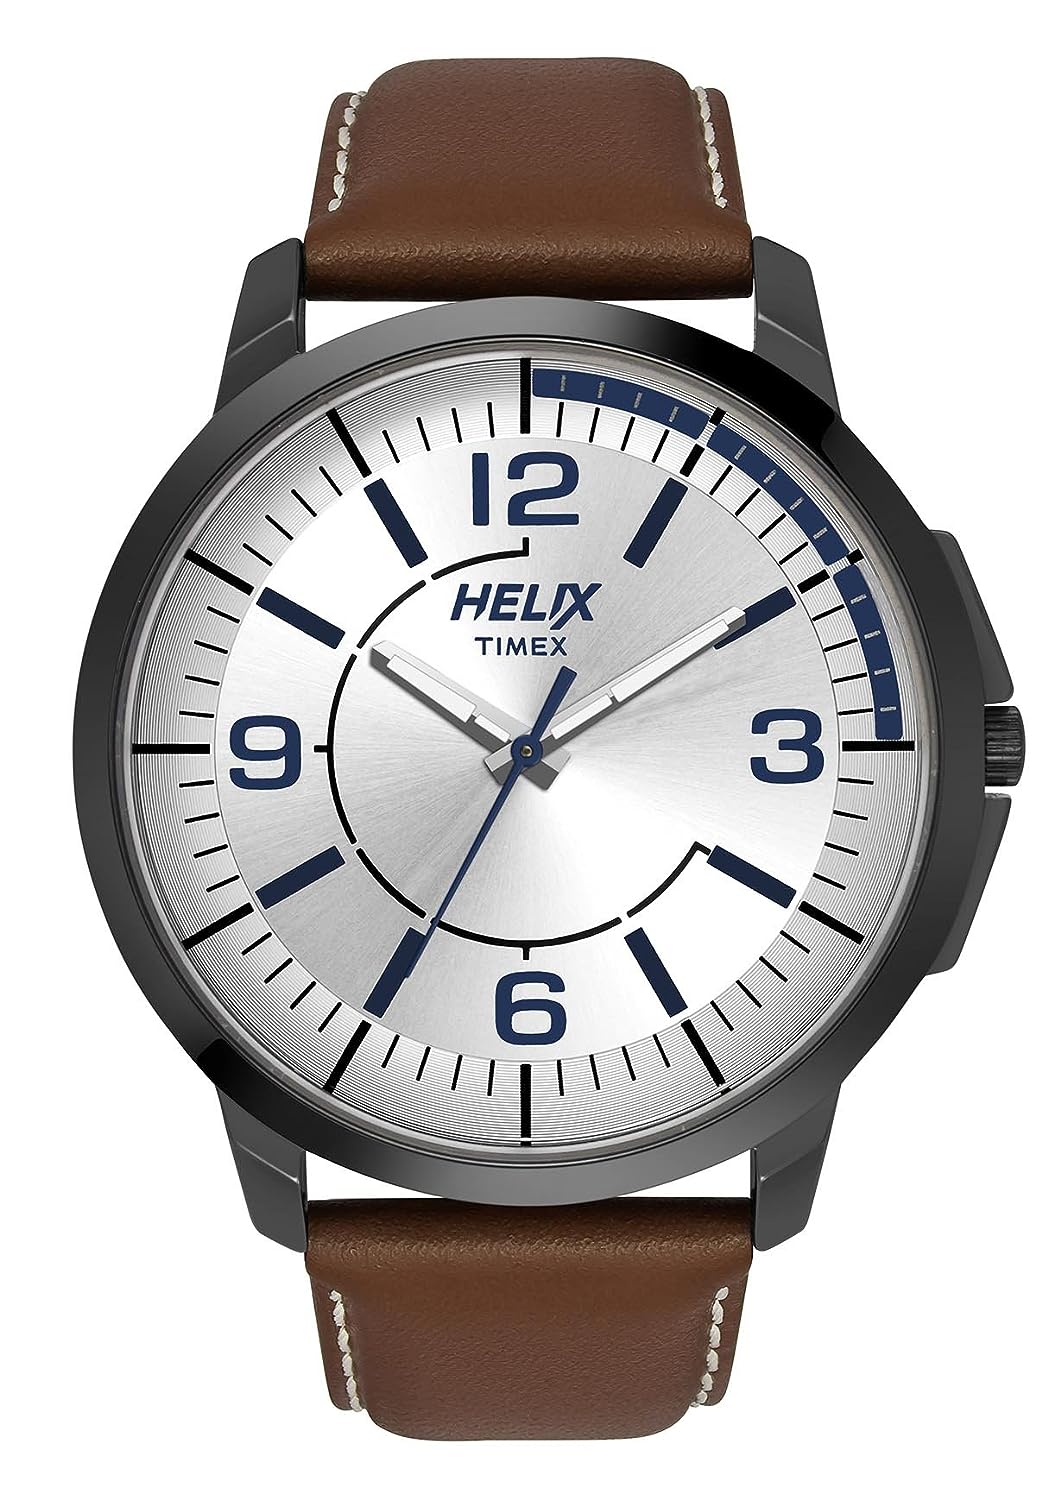 Shop Helix Watches For Women Online At Great Price Offers